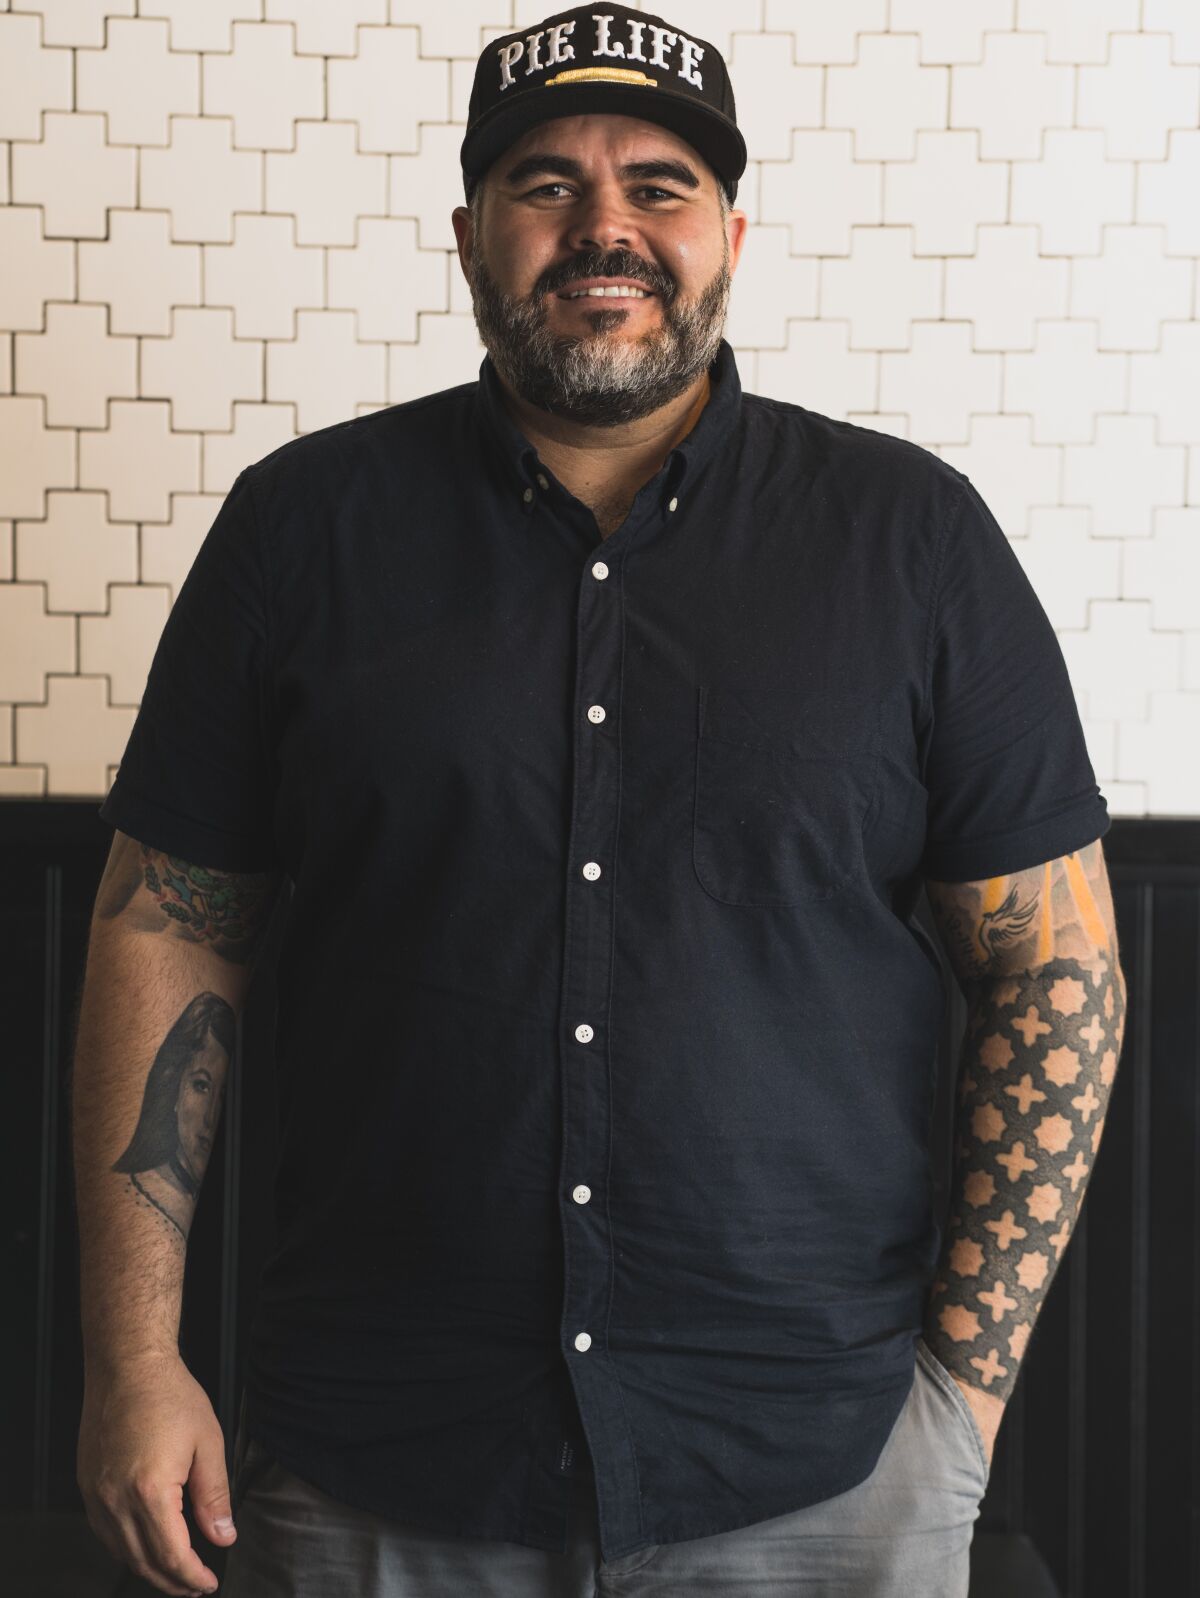 Steven Torres, co-founder, co-owner and director of operations of Pop Pie Co. and Stella Jeans.